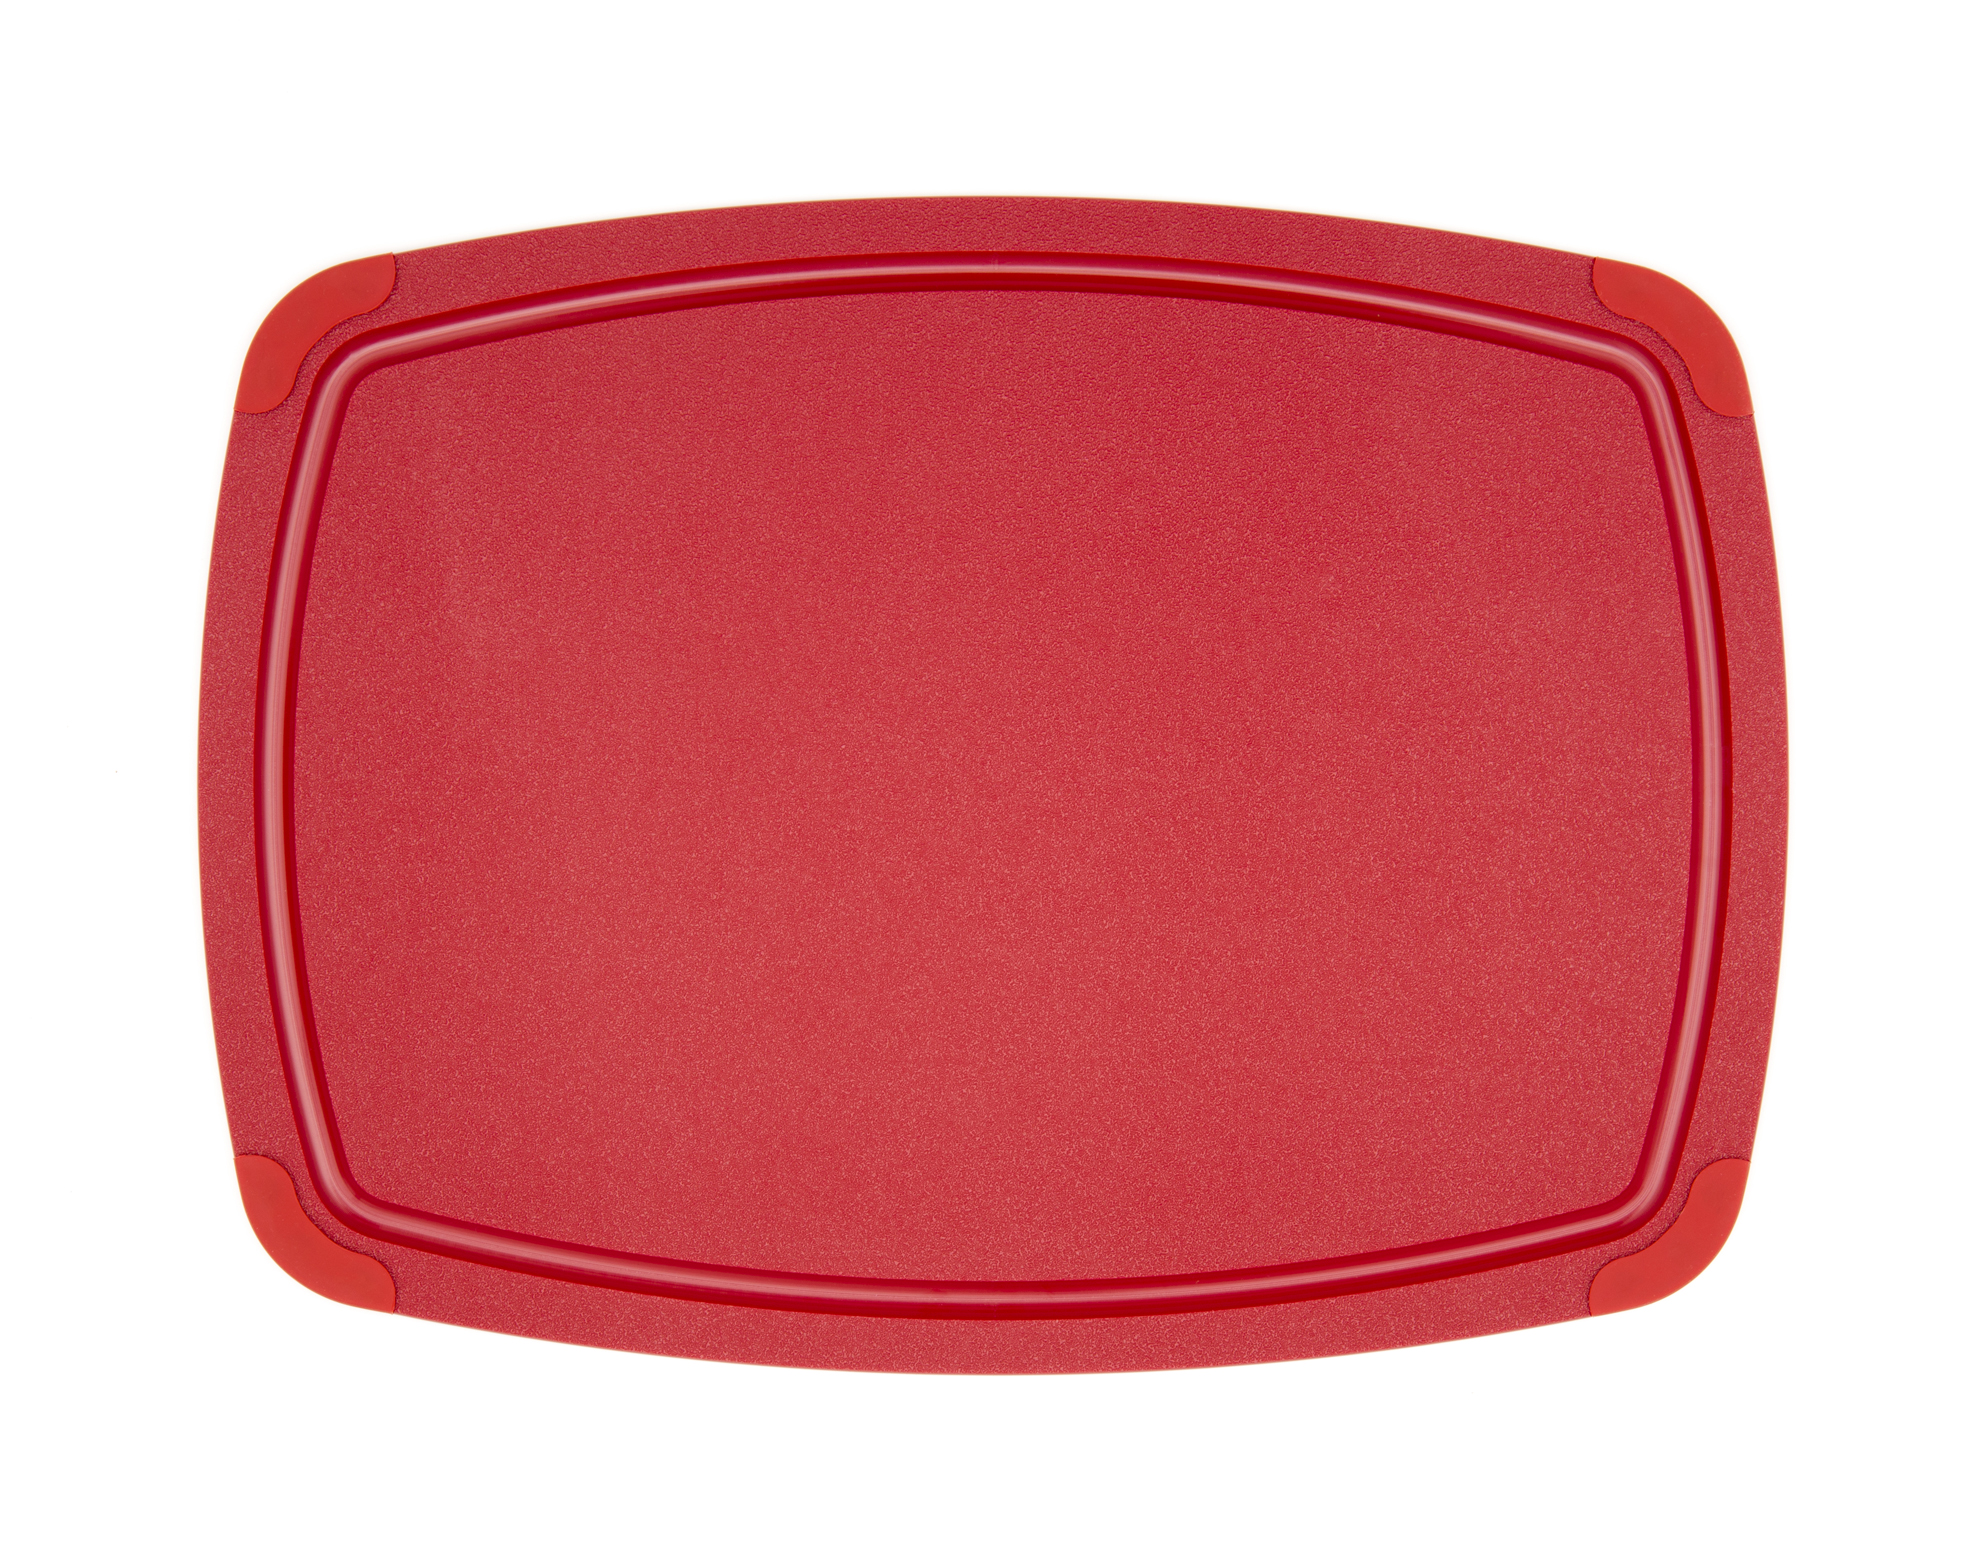 ecooks-MAIN-cutting board poly series-red-402181301